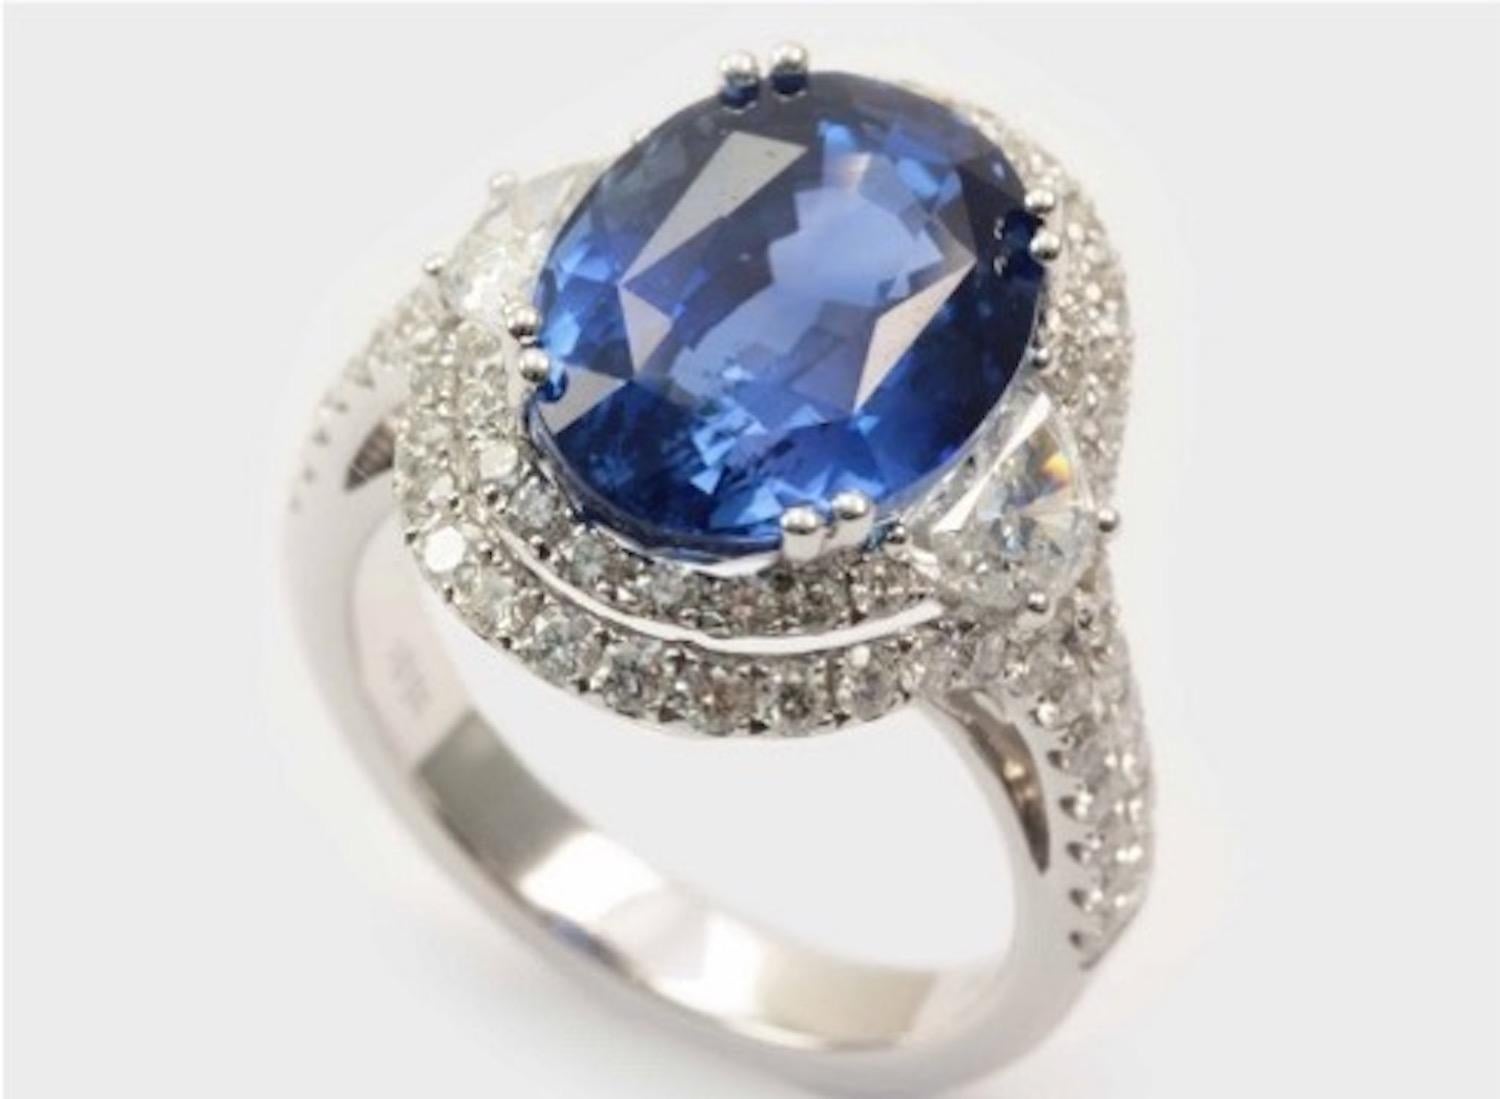 10.01 Unheated Blue Oval Sapphire (Madagascar) and diamonds ring - GRS Certified (Ovalschliff) im Angebot